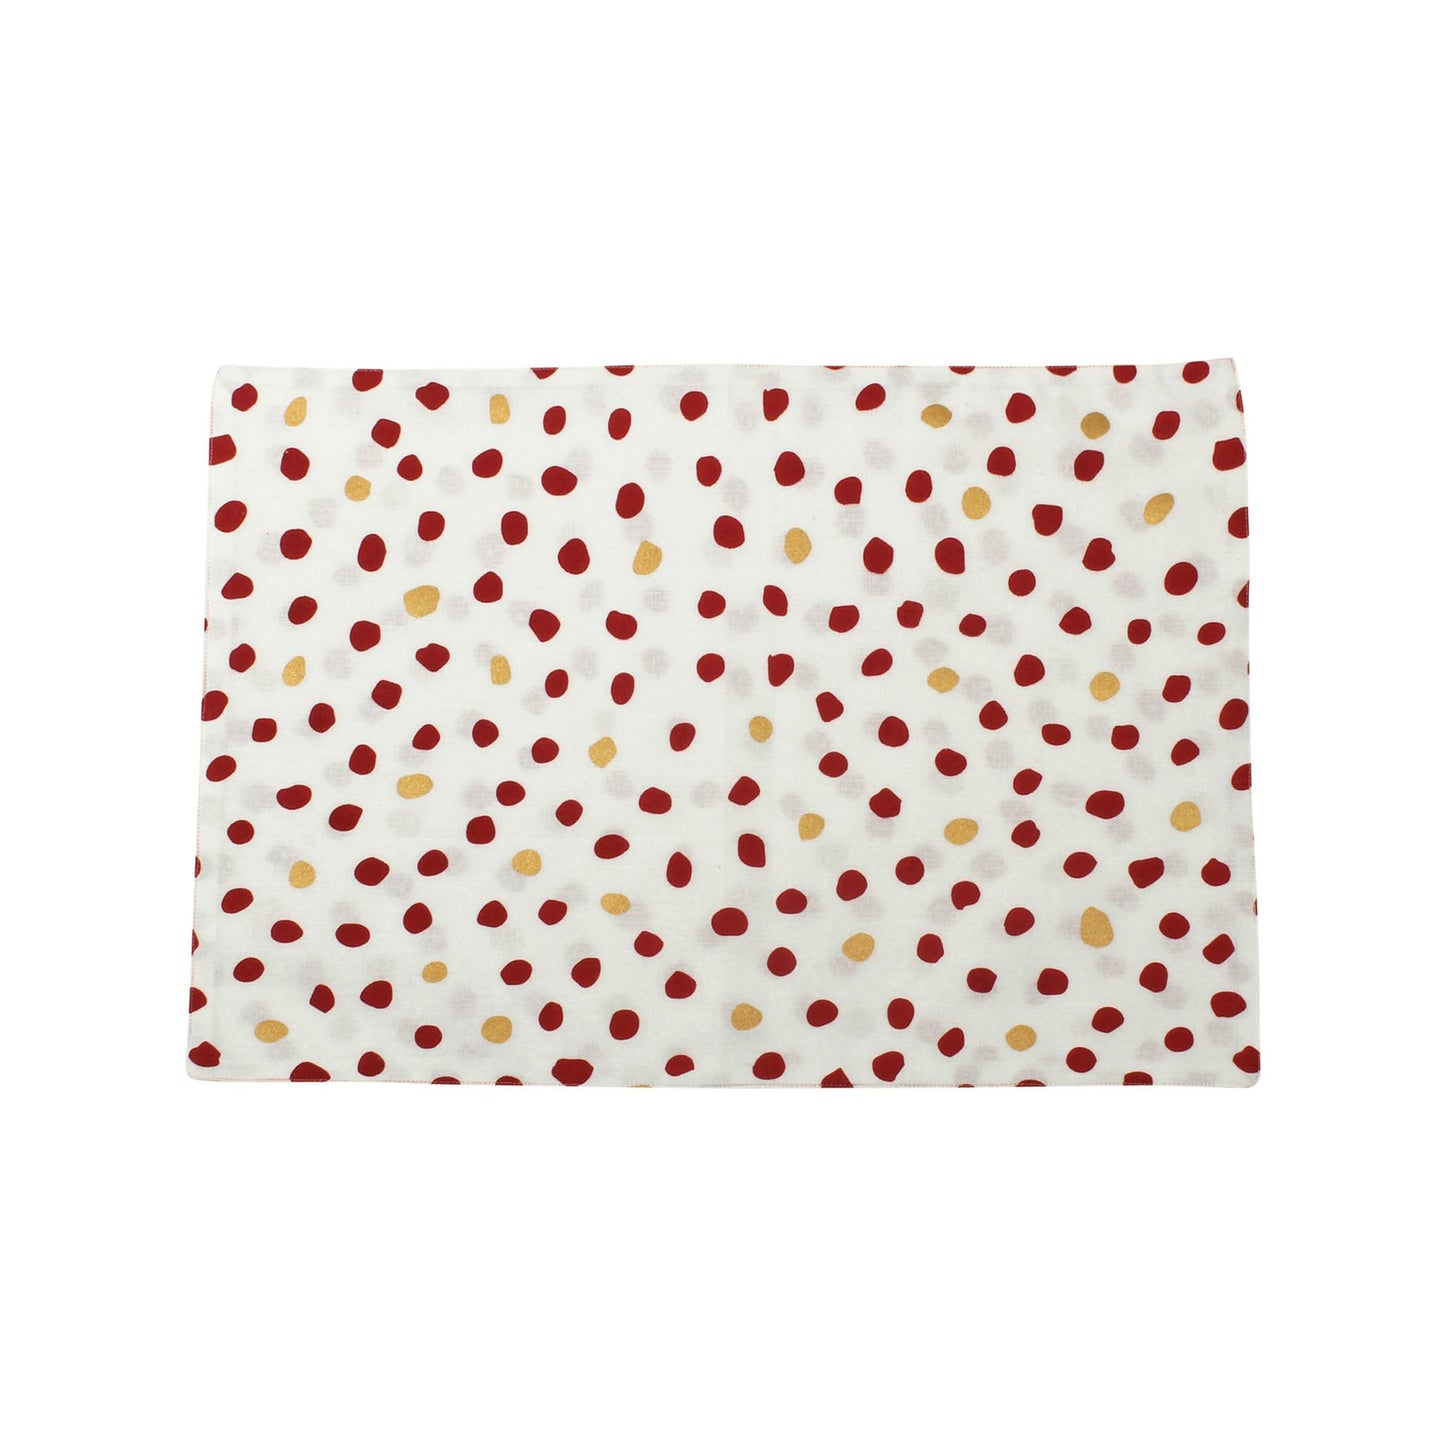 Vietri Bohemian Linen Reversible Placemats, Red and Gold, Set of 4